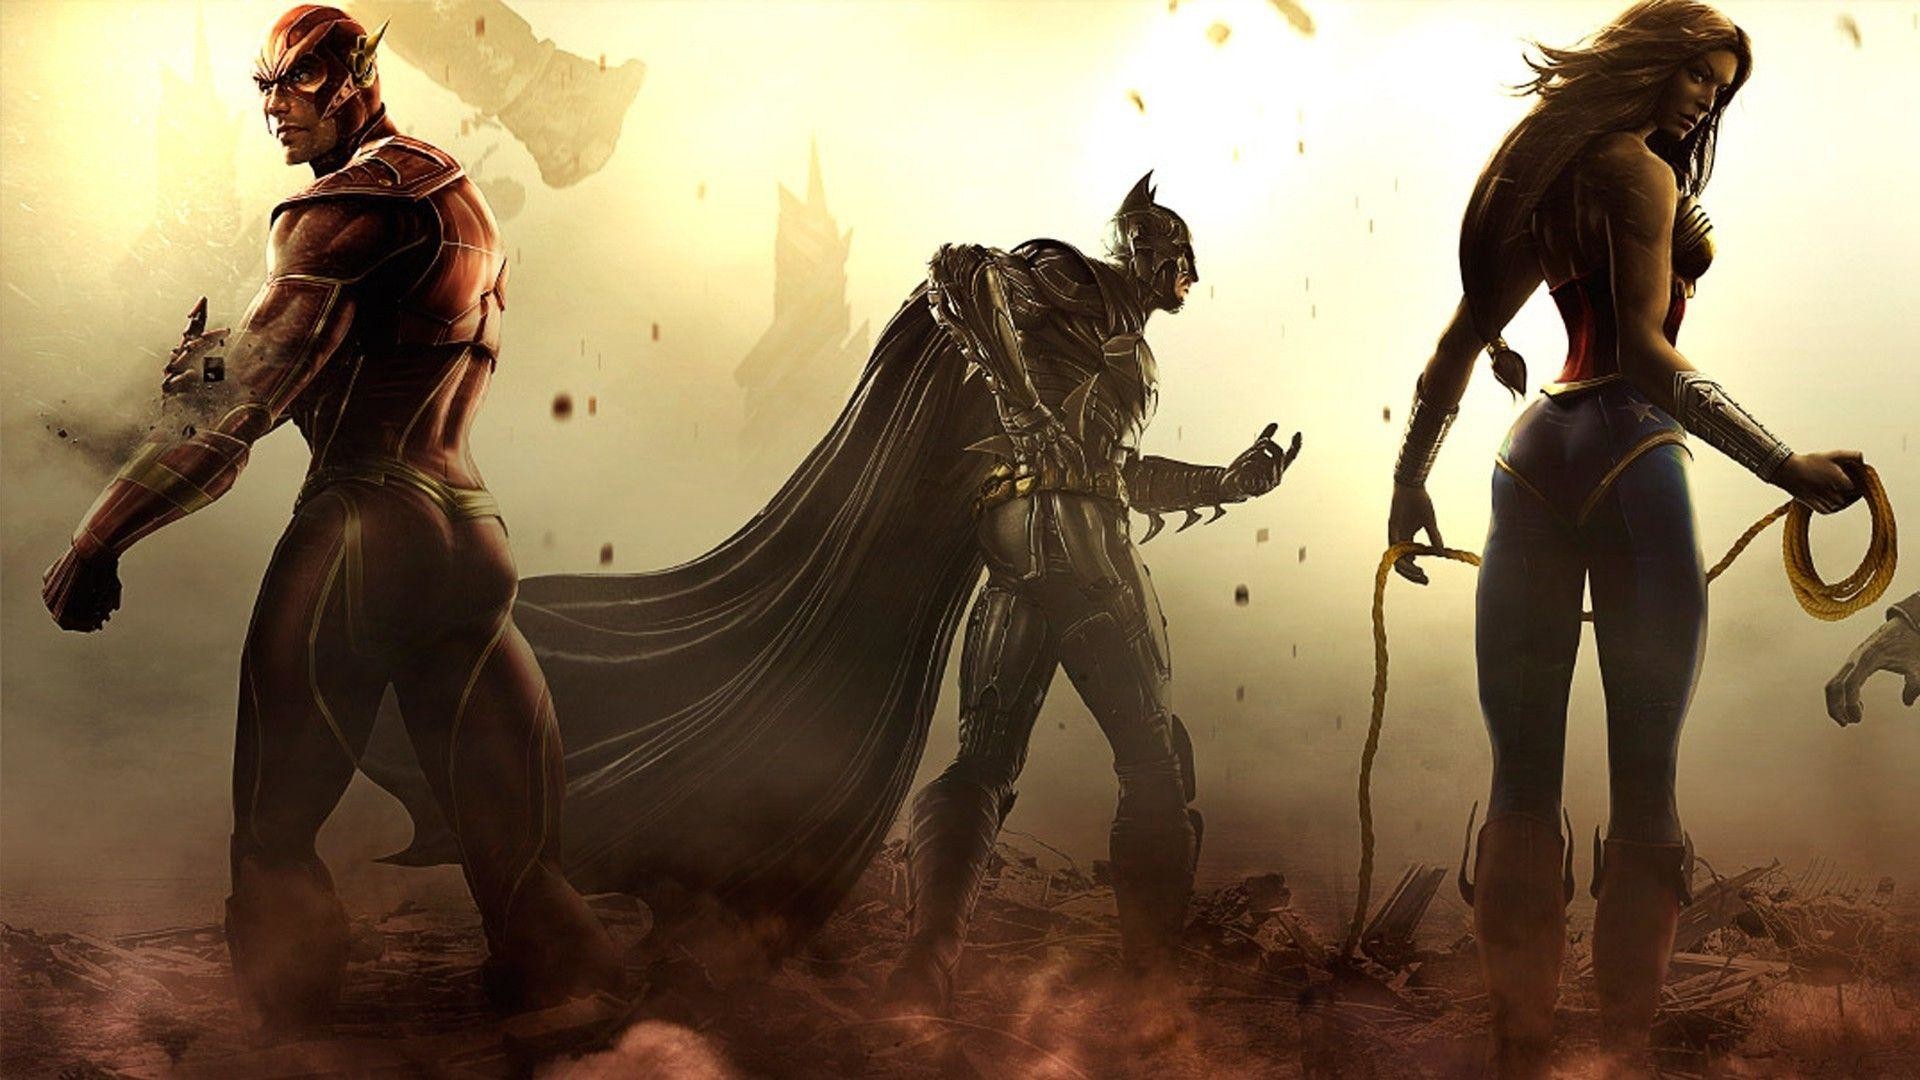 1920x1080 p.23, Injustice Gods Among Us Wallpapers, Injustice Gods Among Us ..